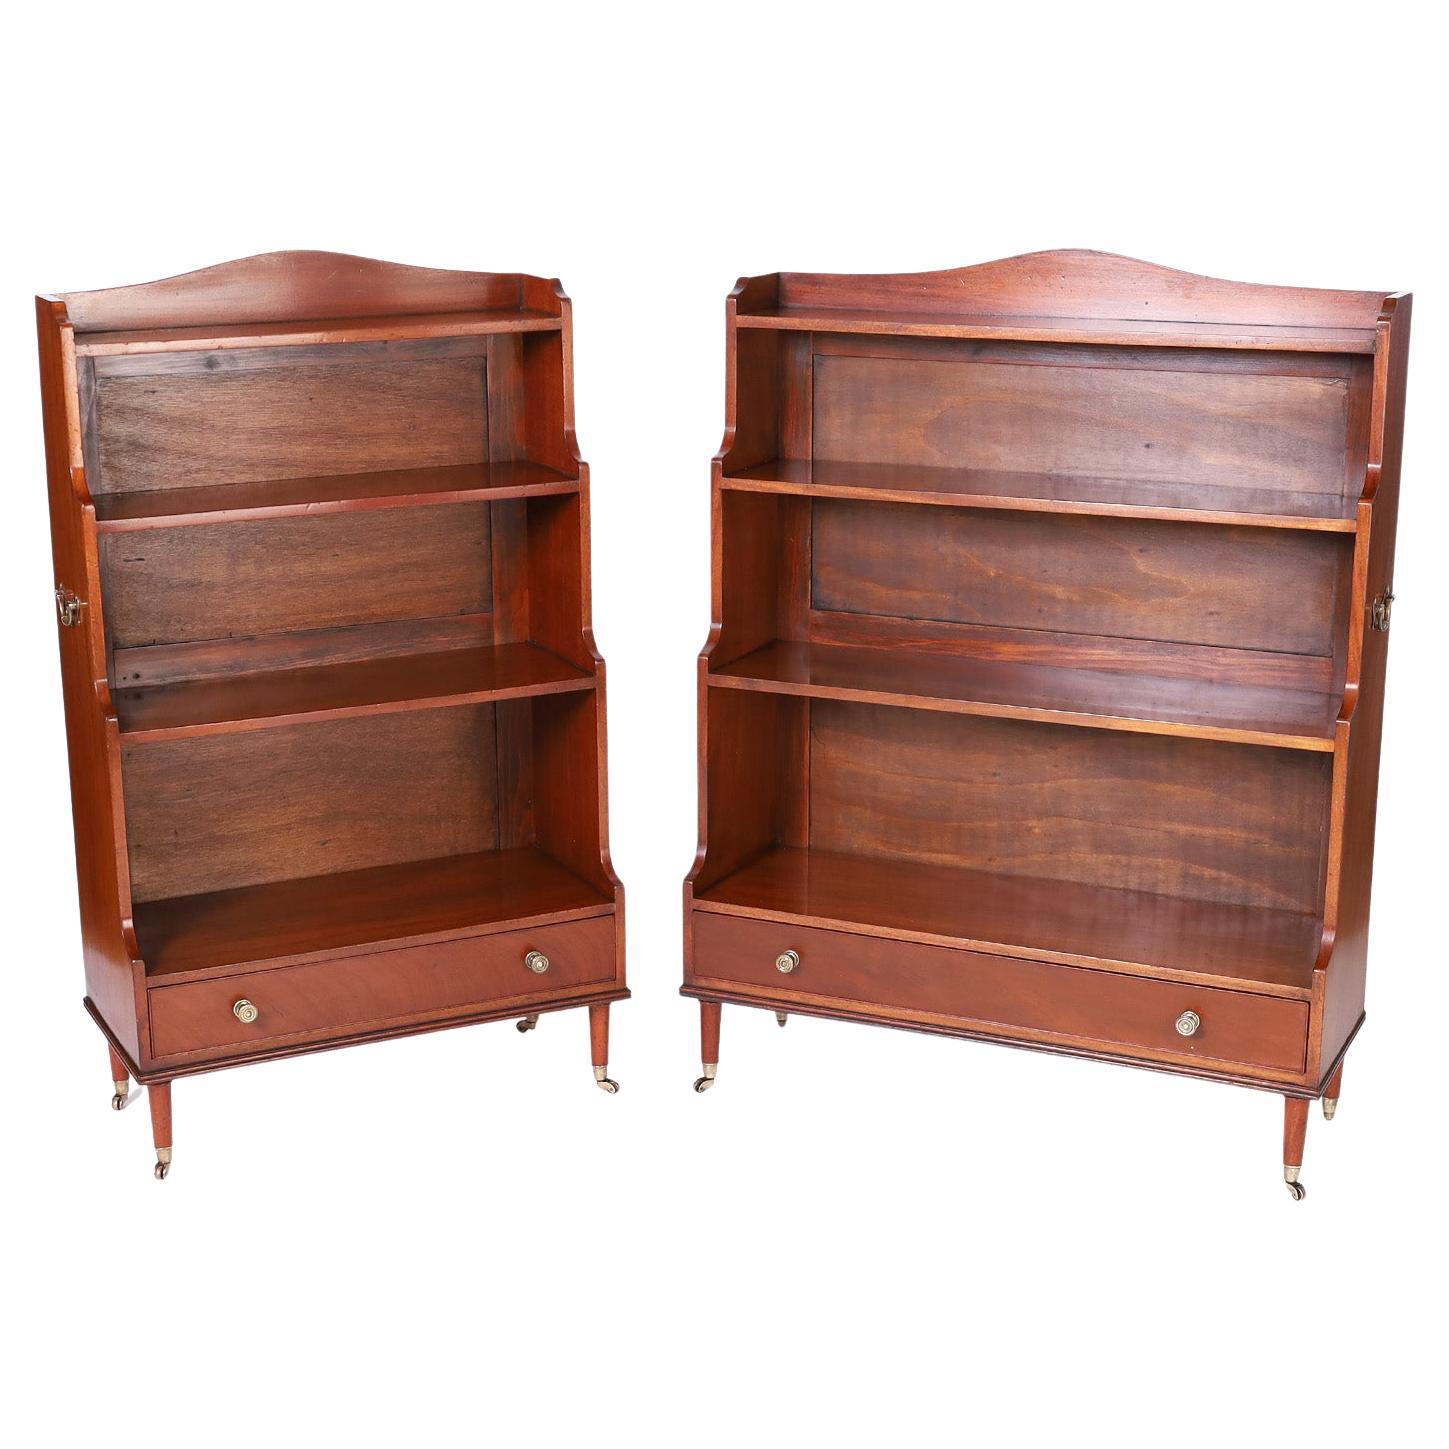 Two Antique English Bookcases